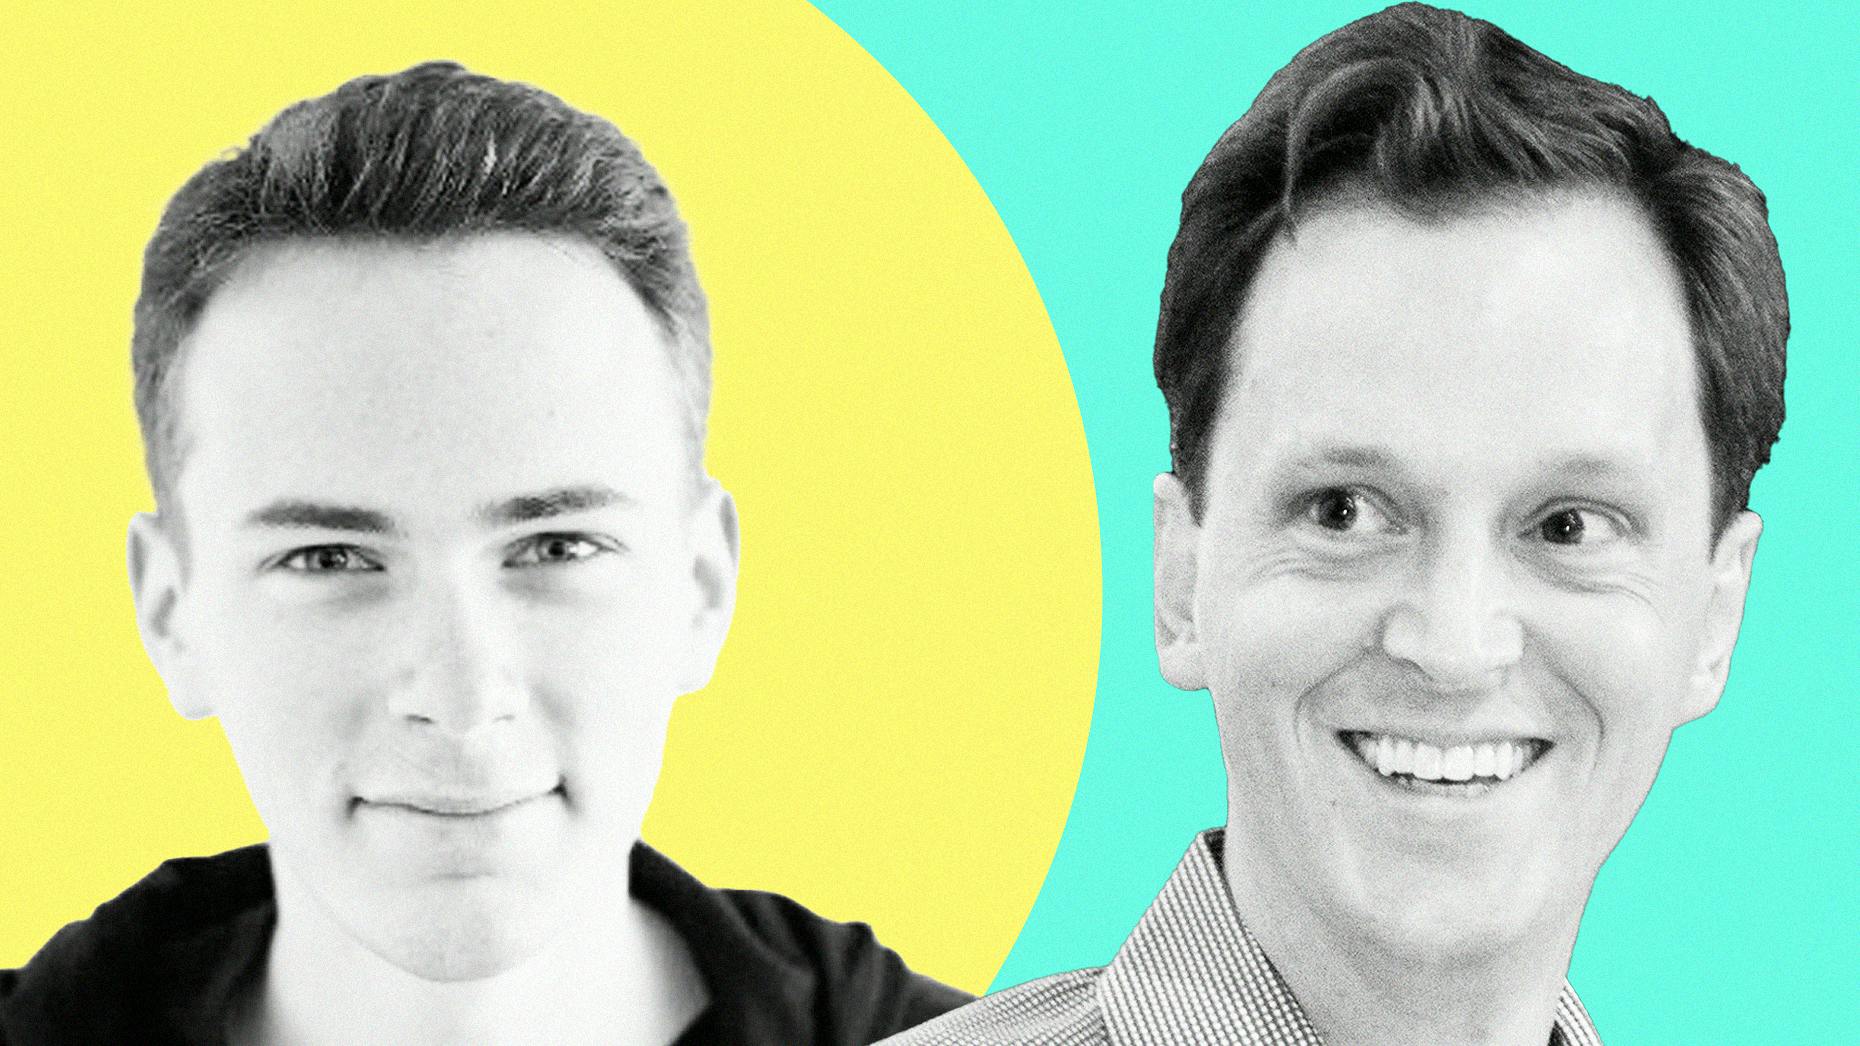 The ‘Magic’ Breakthrough That Got Friedman and Gross to Bet $100 Million on a Coding Startup